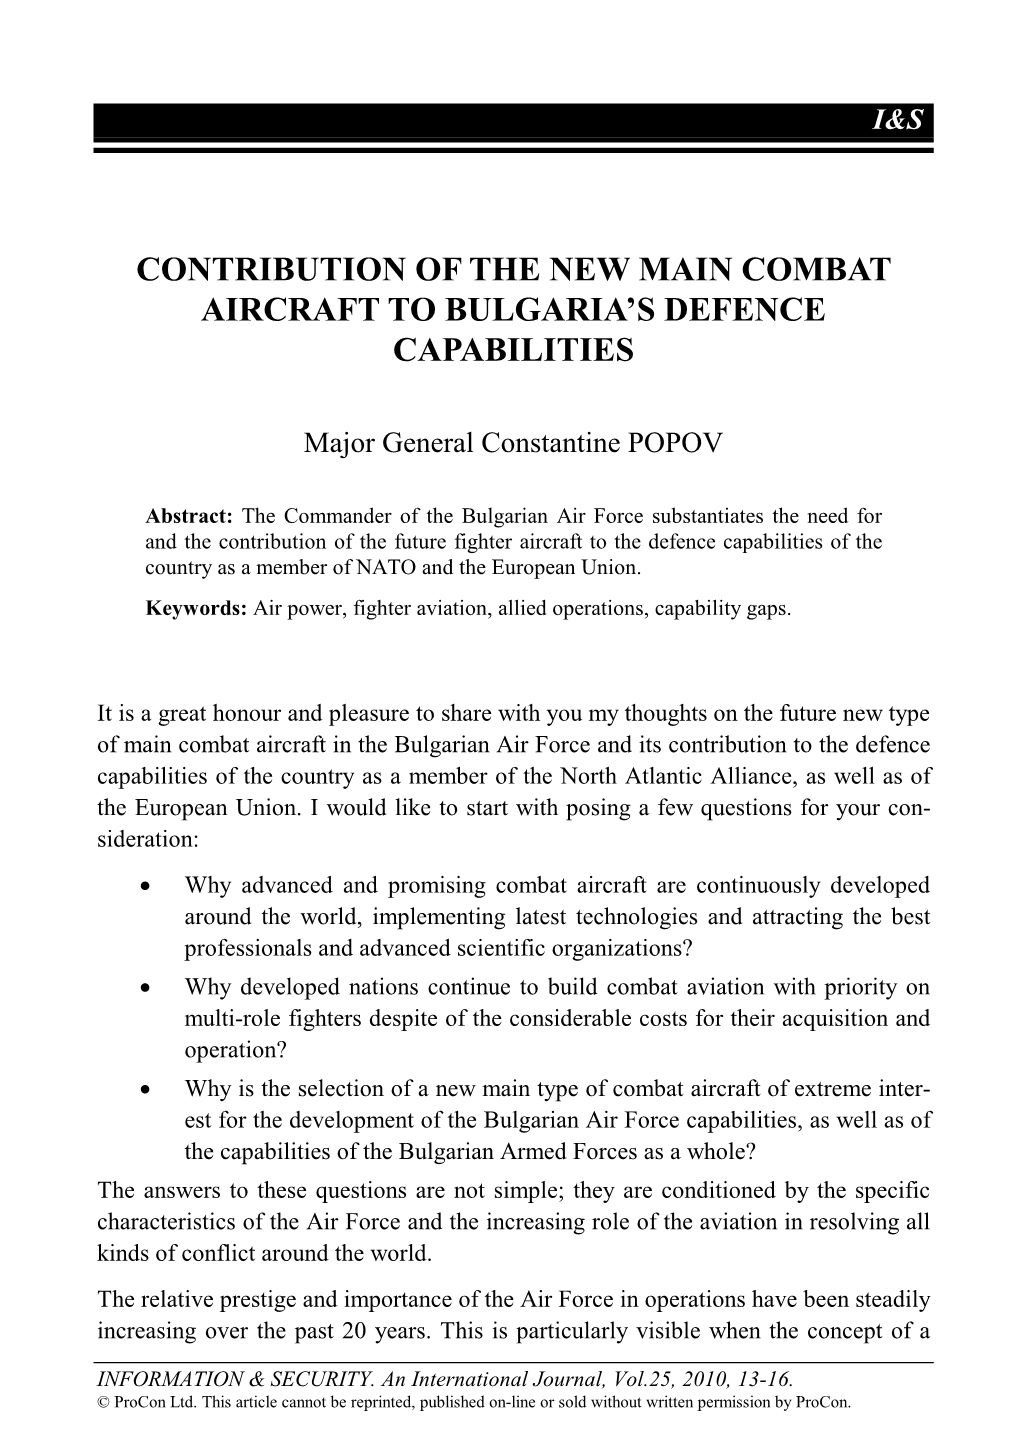 Contribution of the New Main Combat Aircraft to Bulgaria's Defence